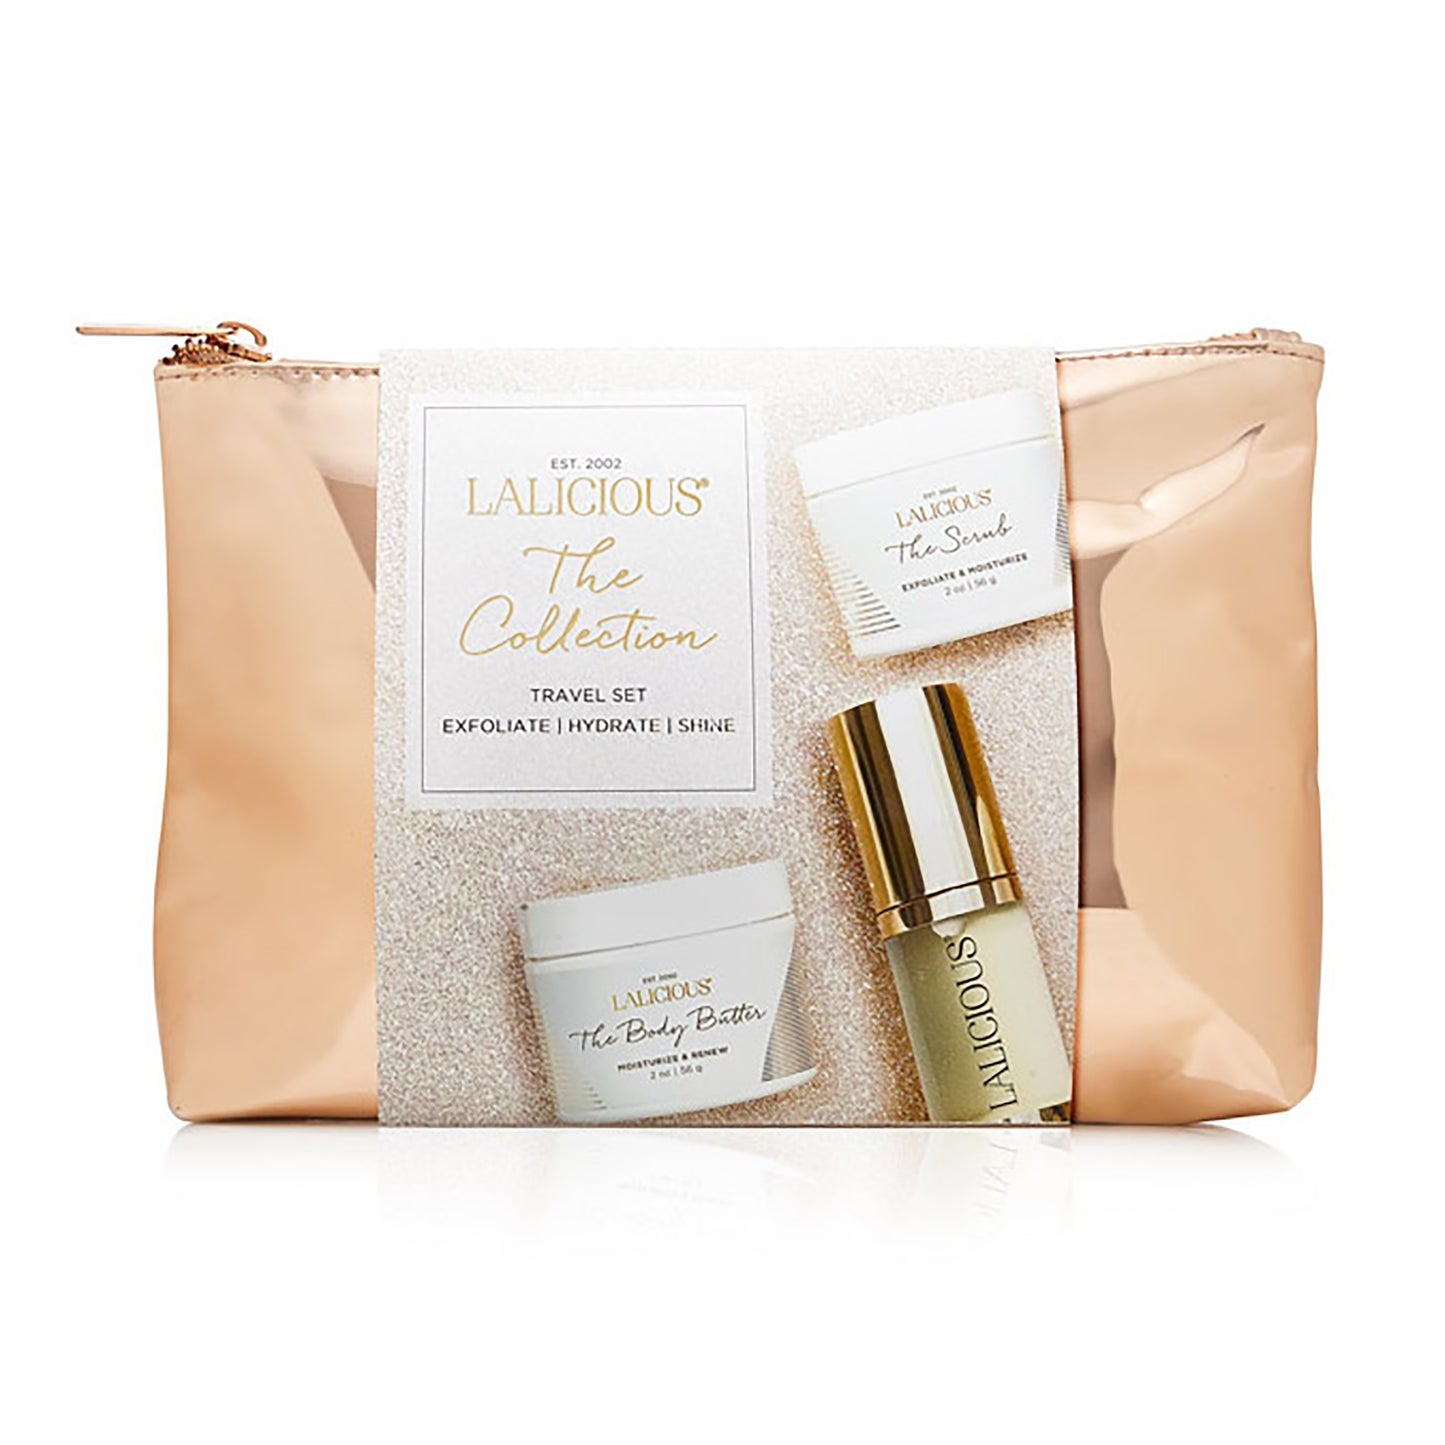 Lalicious - Pure Luxury - The Signature Collection Travel Set